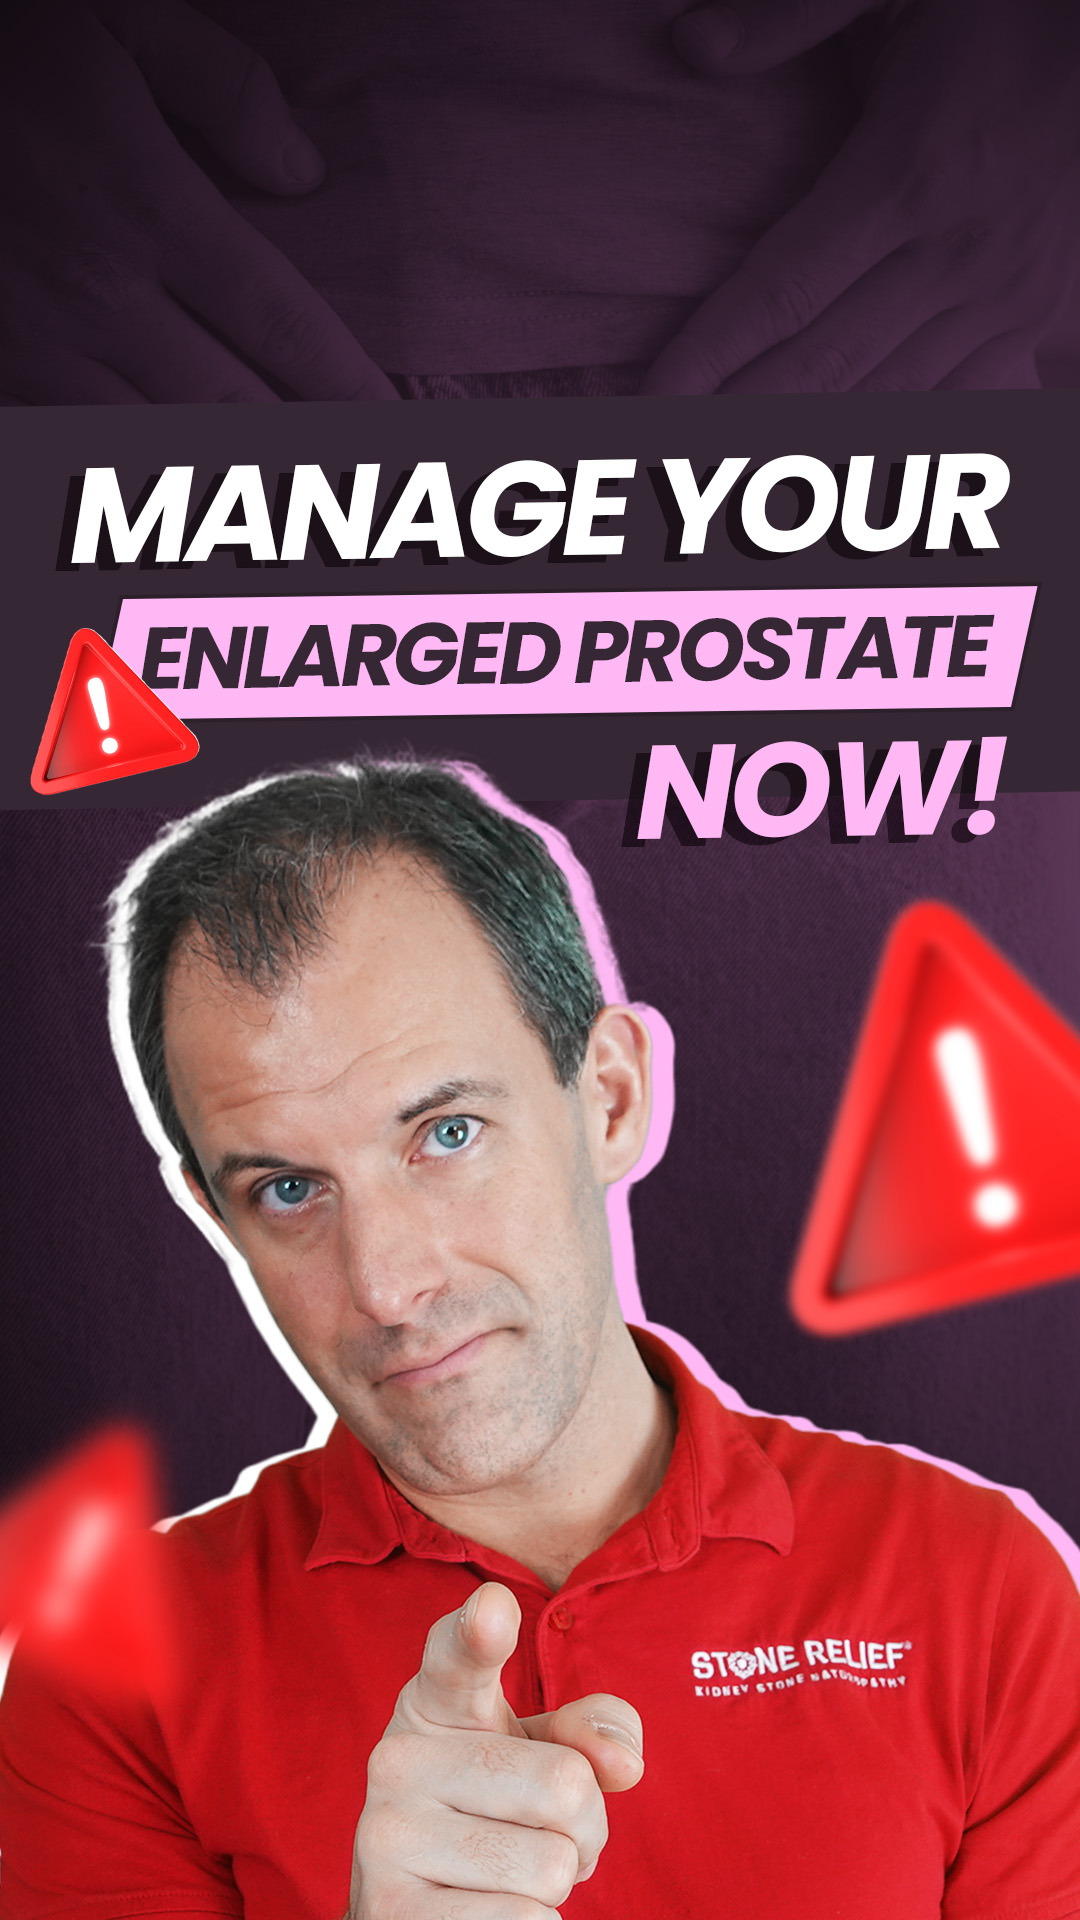 Manage Your Enlarged Prostate to Prevent Kidney stones